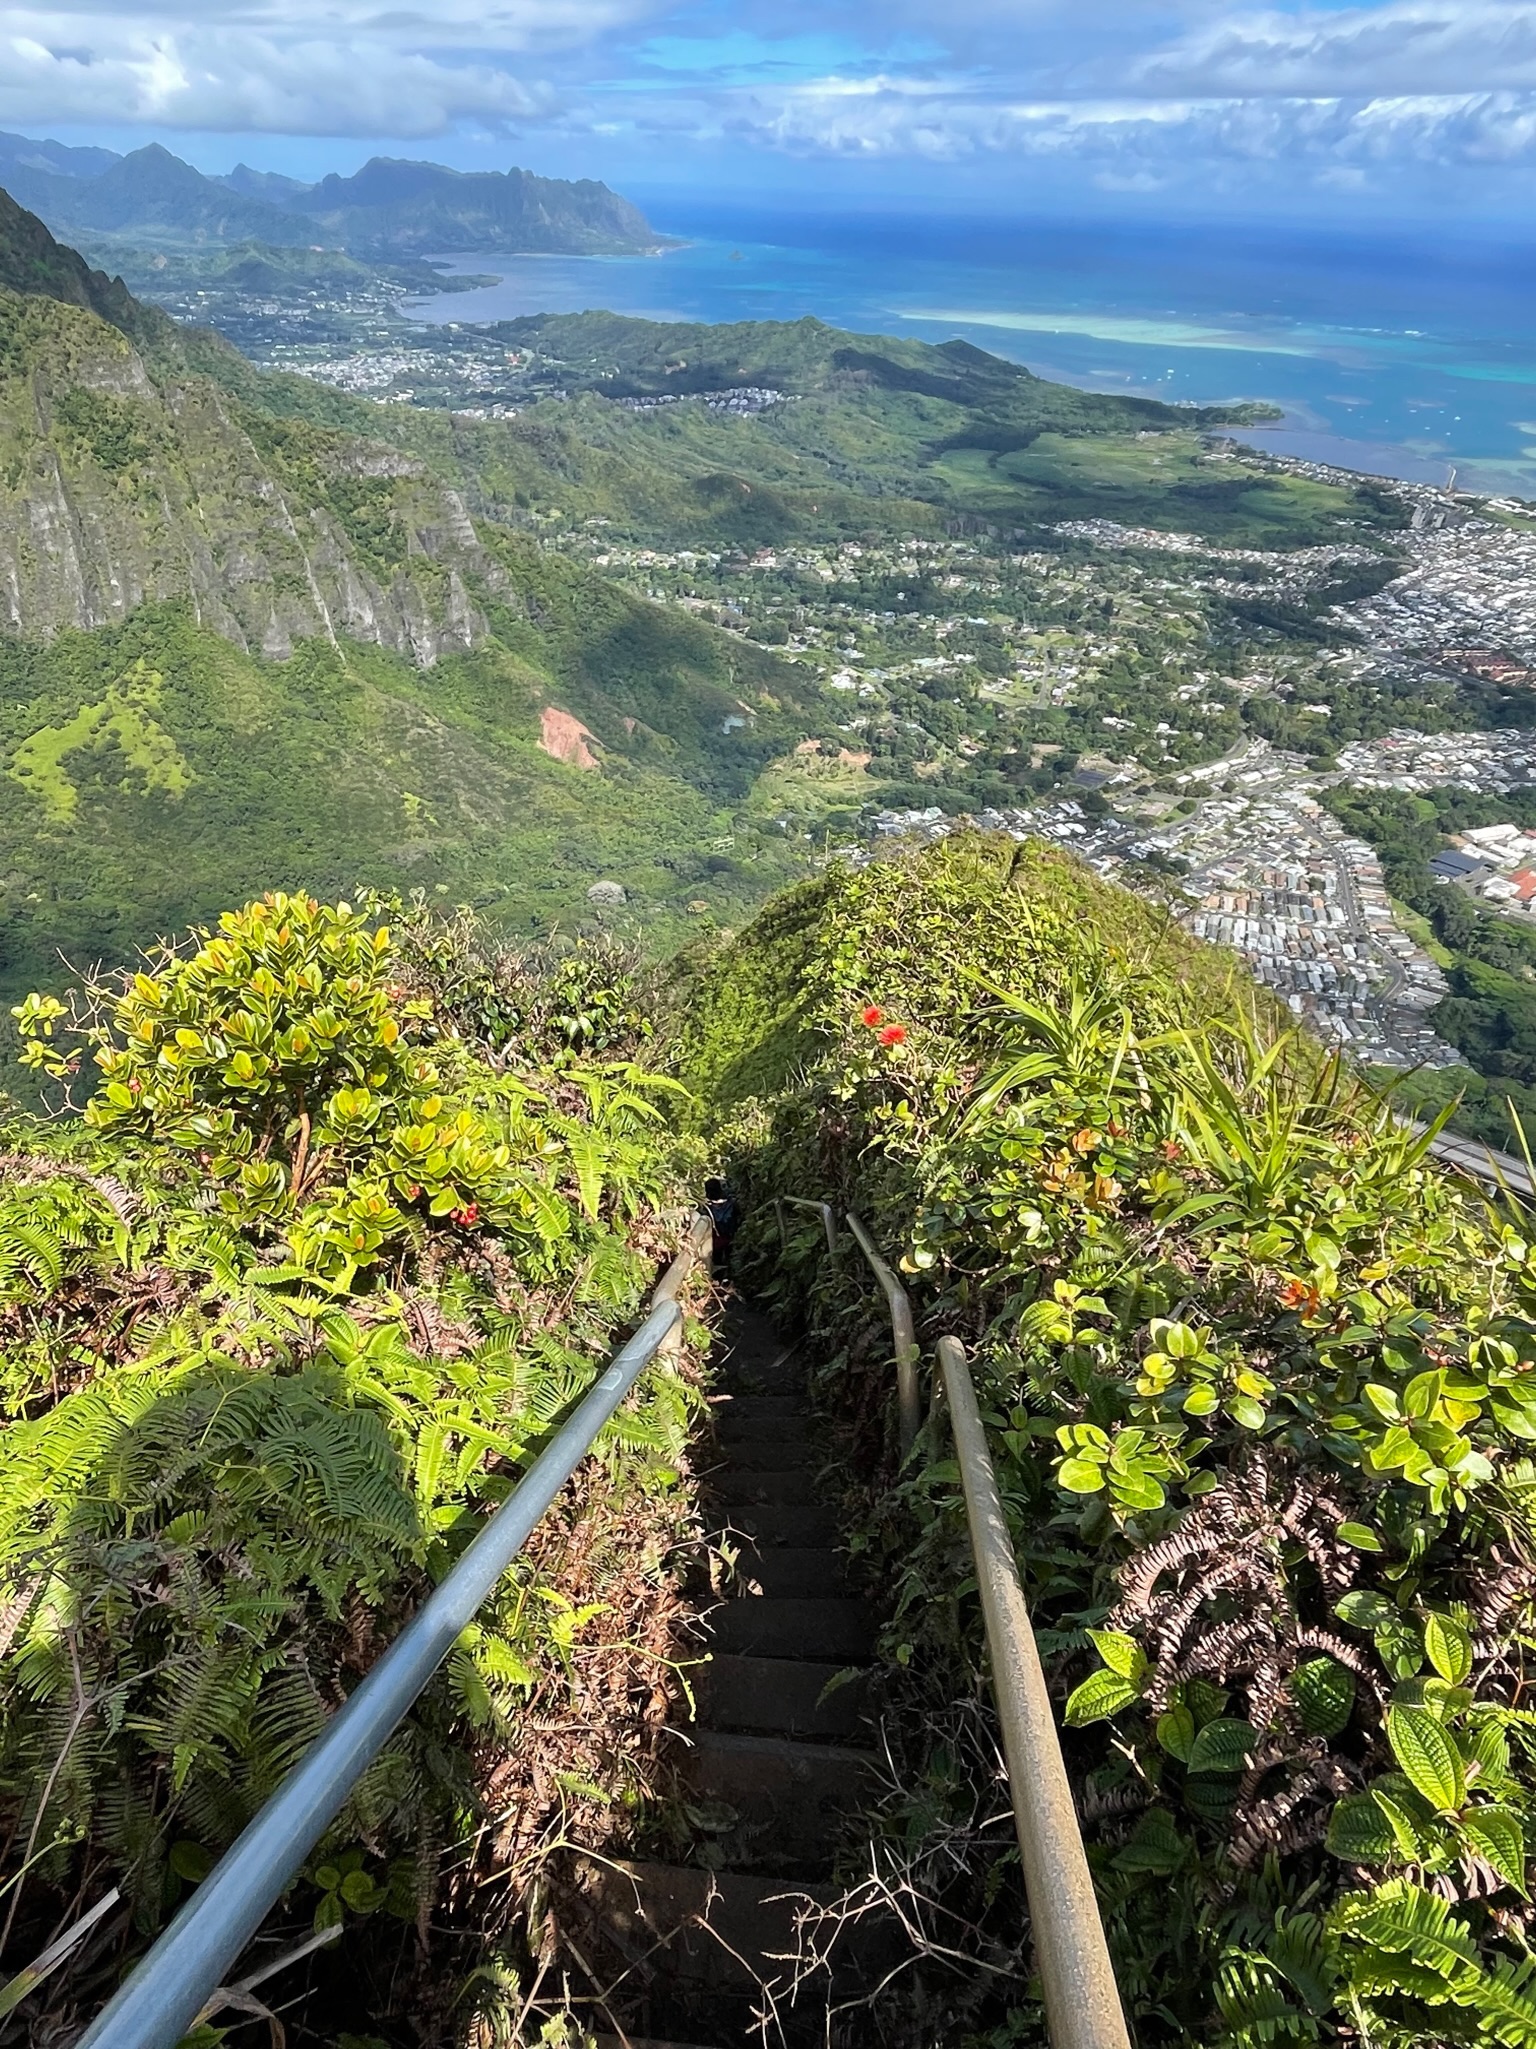 Hawaii Will Remove Its Famous 'Stairway to Heaven' — Here's Why